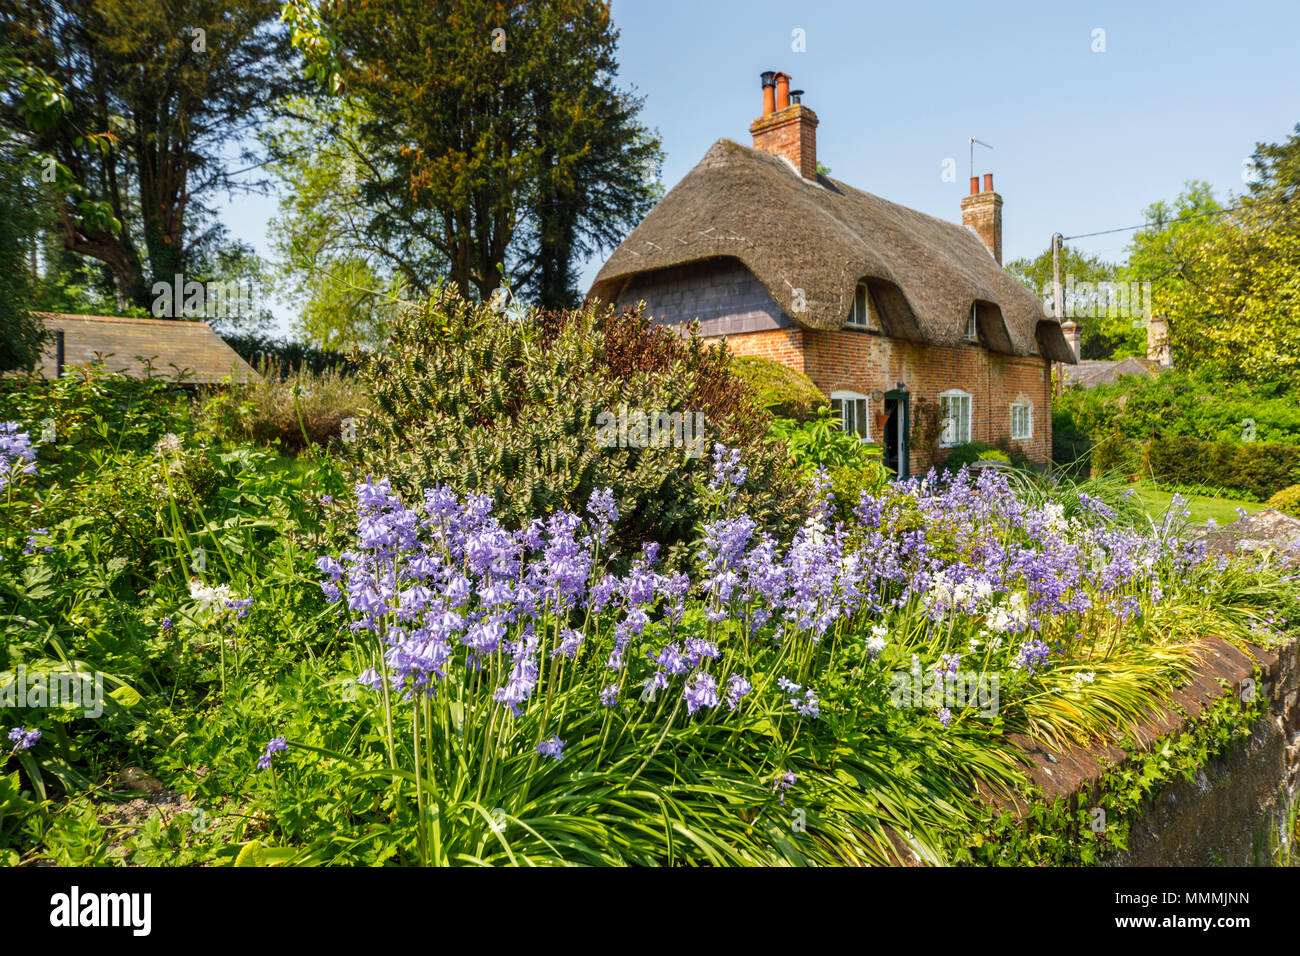 A traditional thatched cottage in local style with bluebells in the front garden, East Stratton, a small village near Winchester in Hampshire, UK Stock Photo